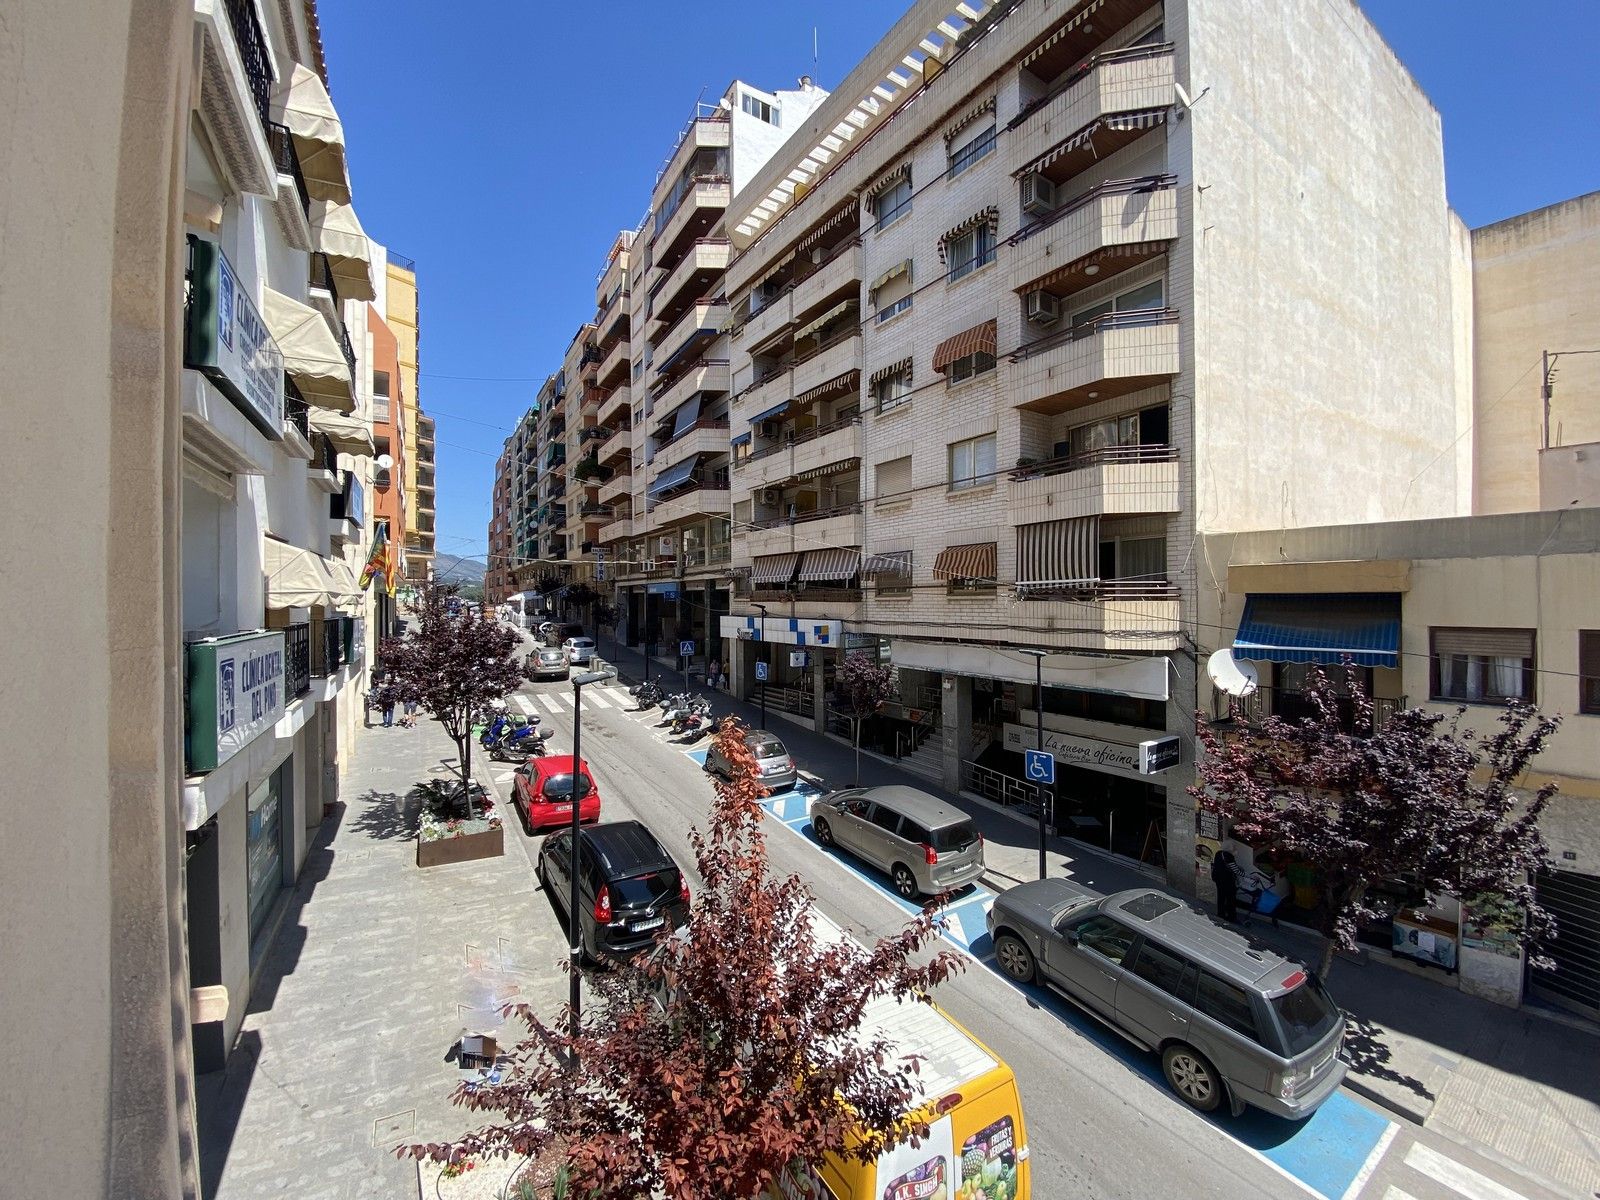 Exclusive apartment located in the heart of Calpe